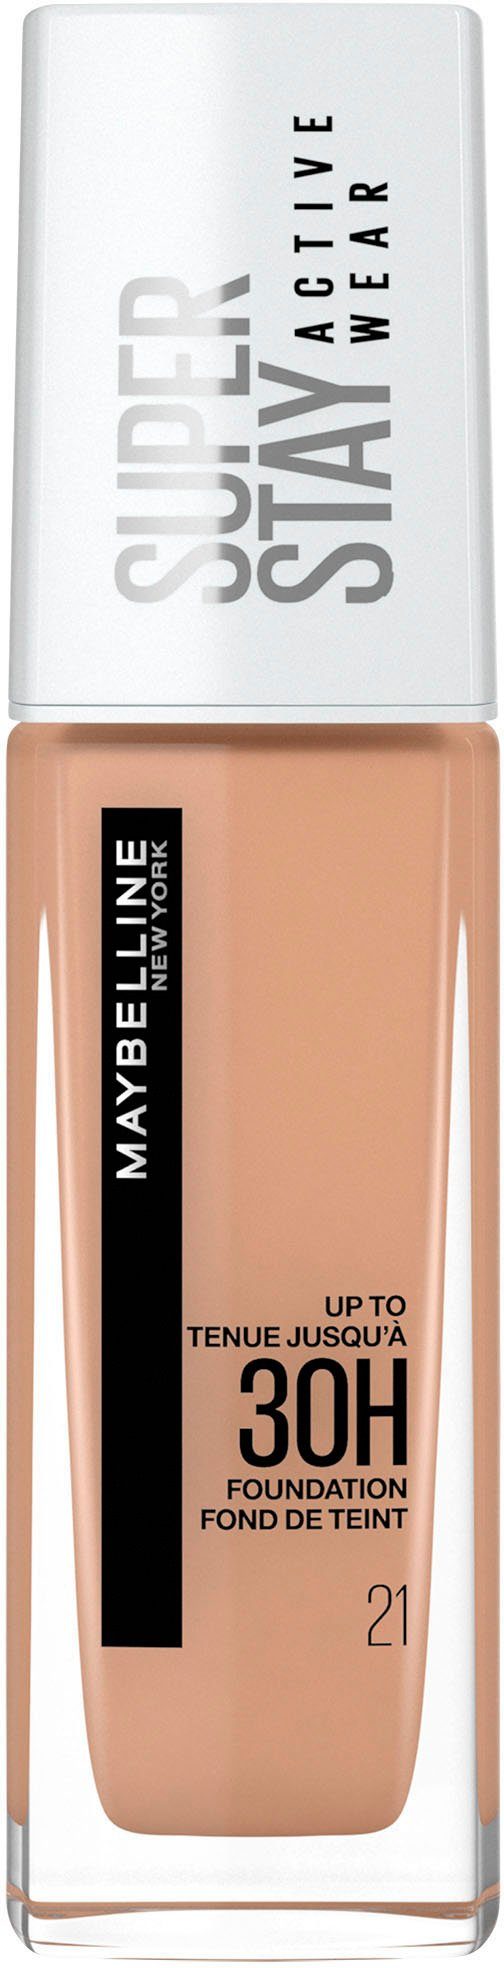 MAYBELLINE NEW Beige Wear Super Foundation Active Nude Stay 21 YORK